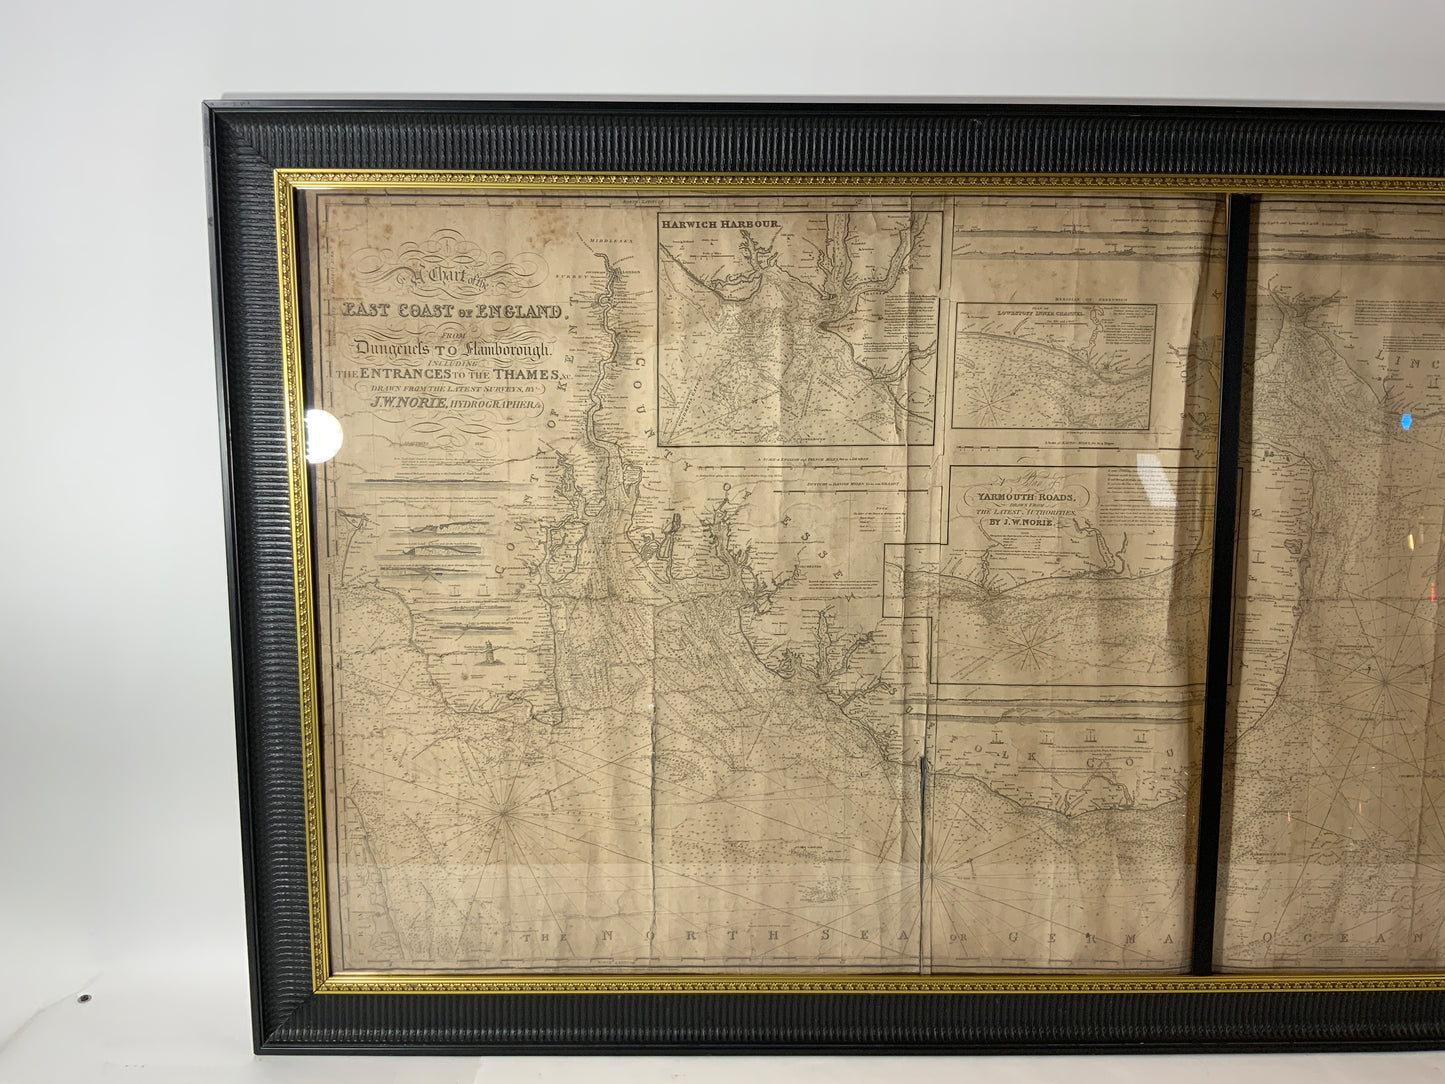 Chart of the East Coast of England - Lannan Gallery